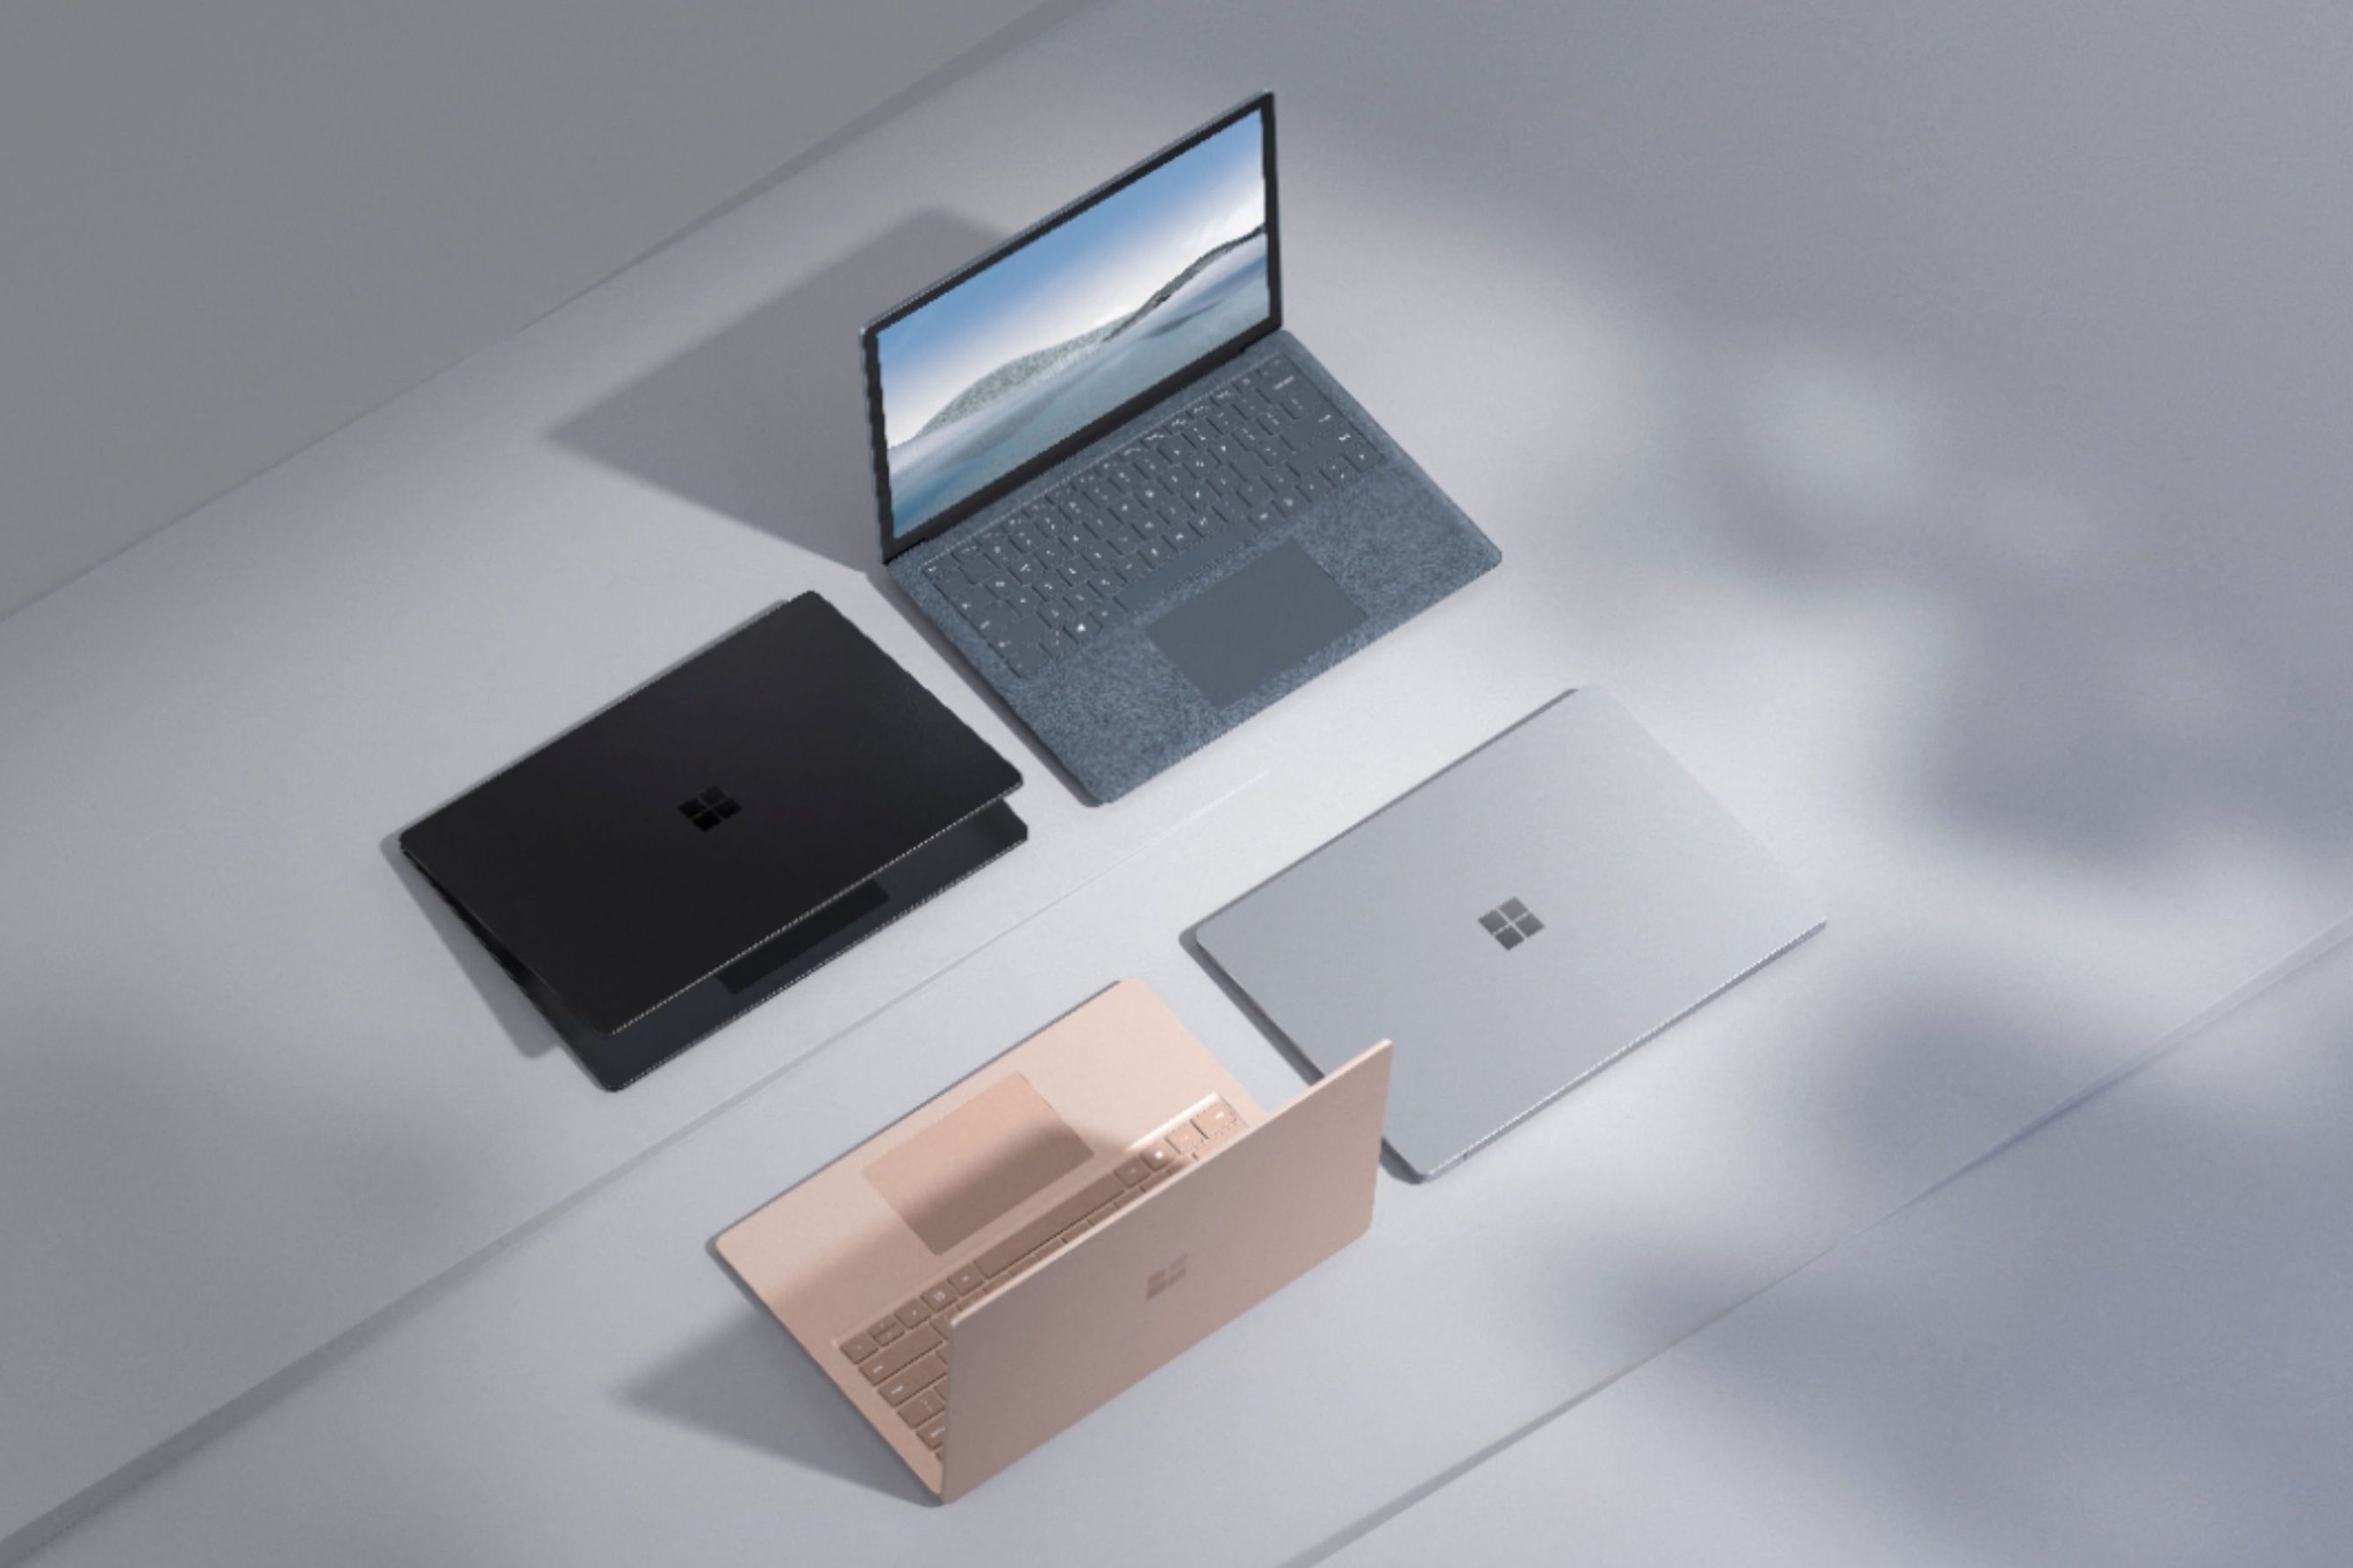 Microsoft Surface Laptop 5 with 13.5